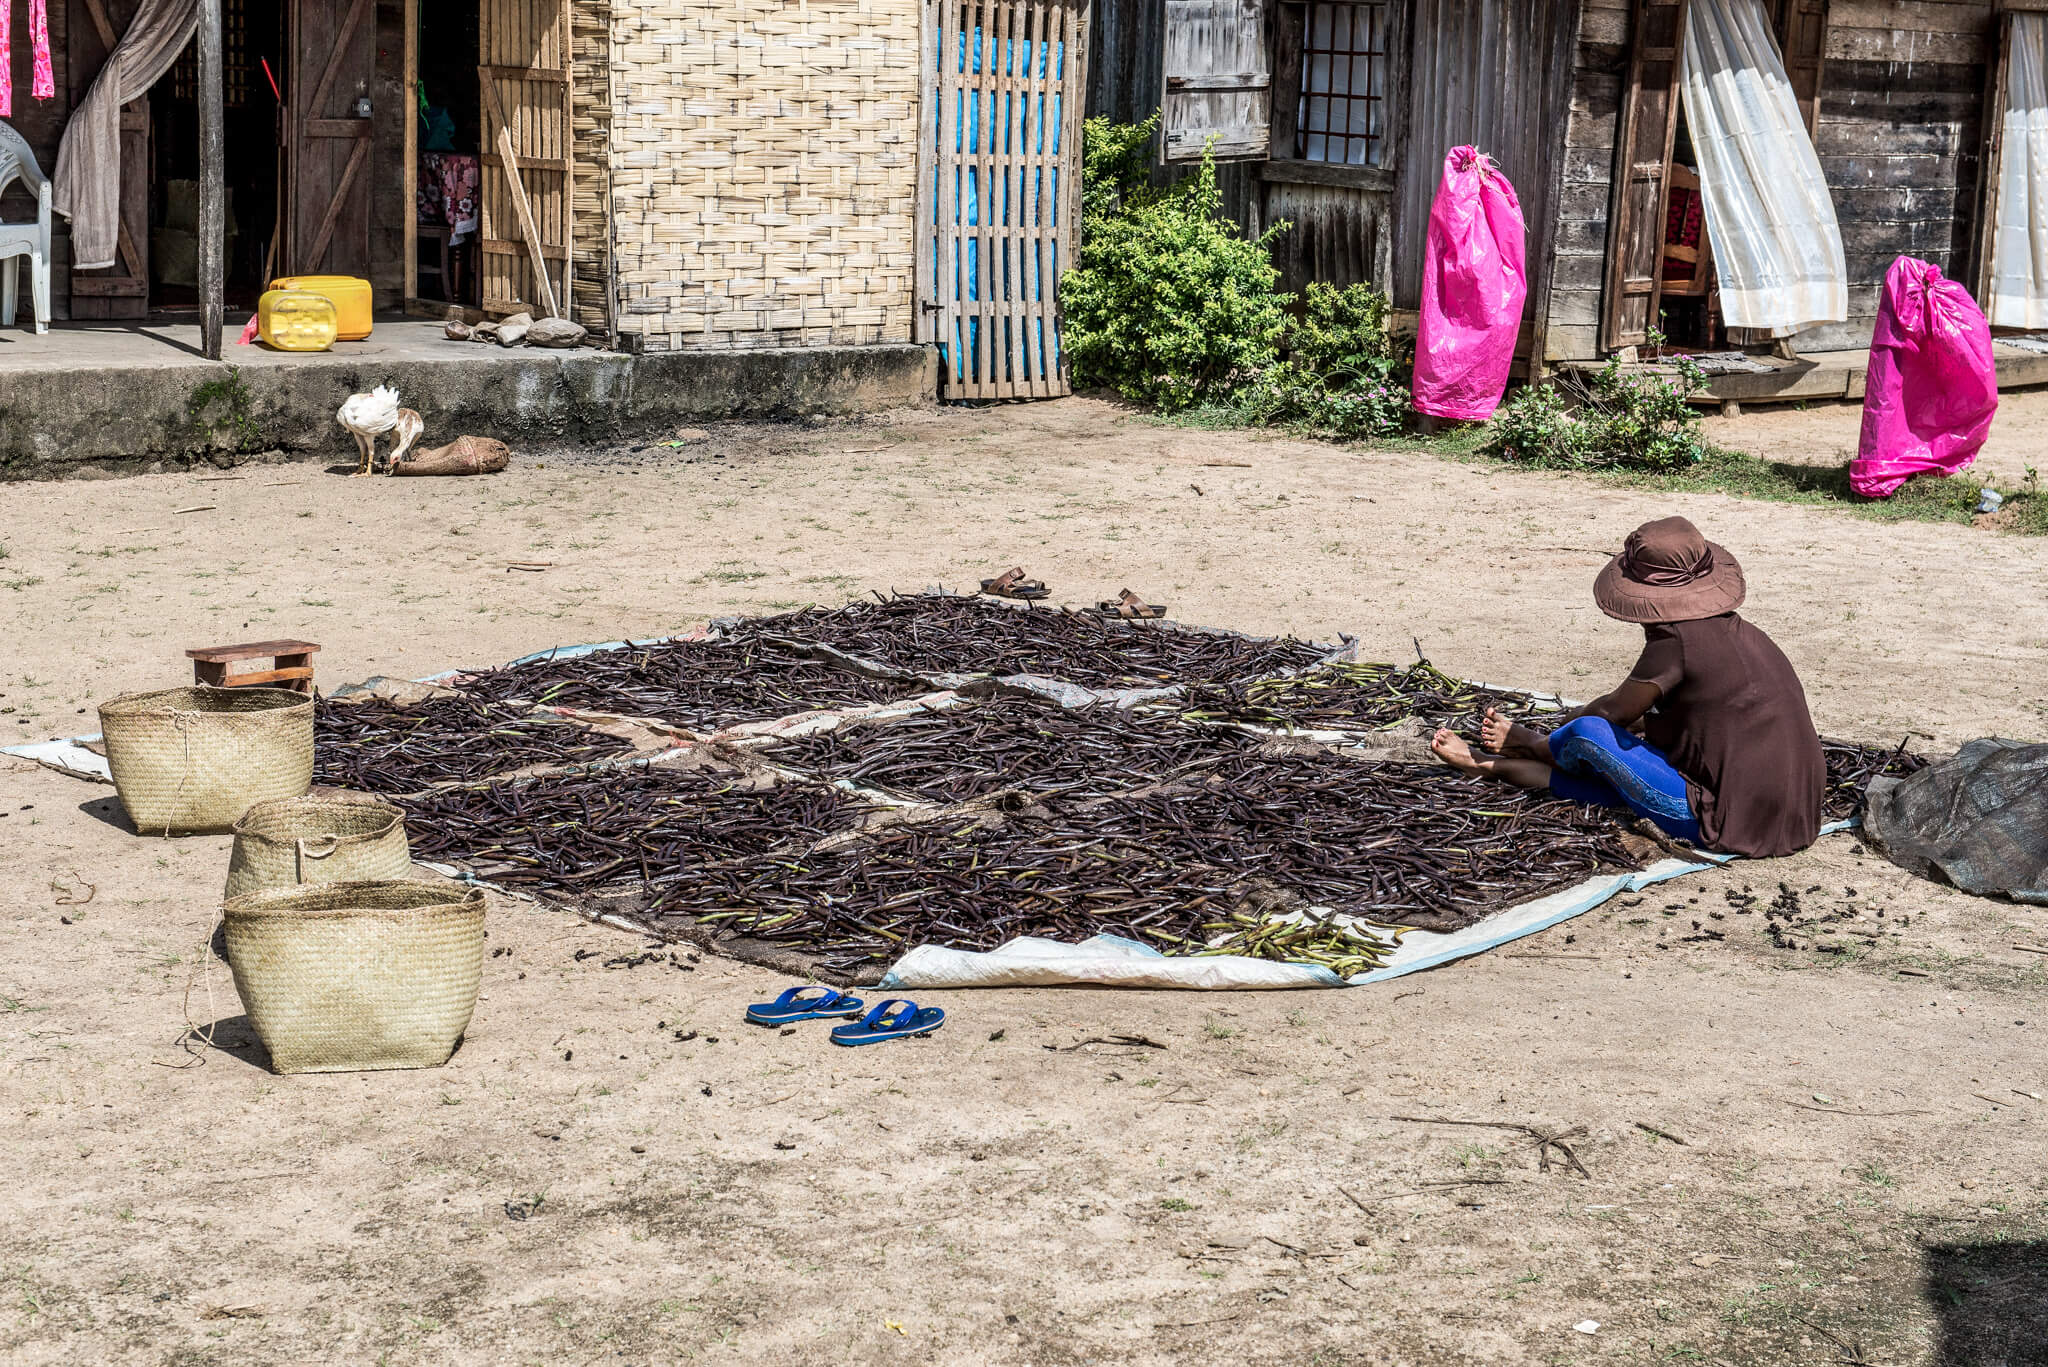 Although entire families earn their livelihood from the vanilla industry